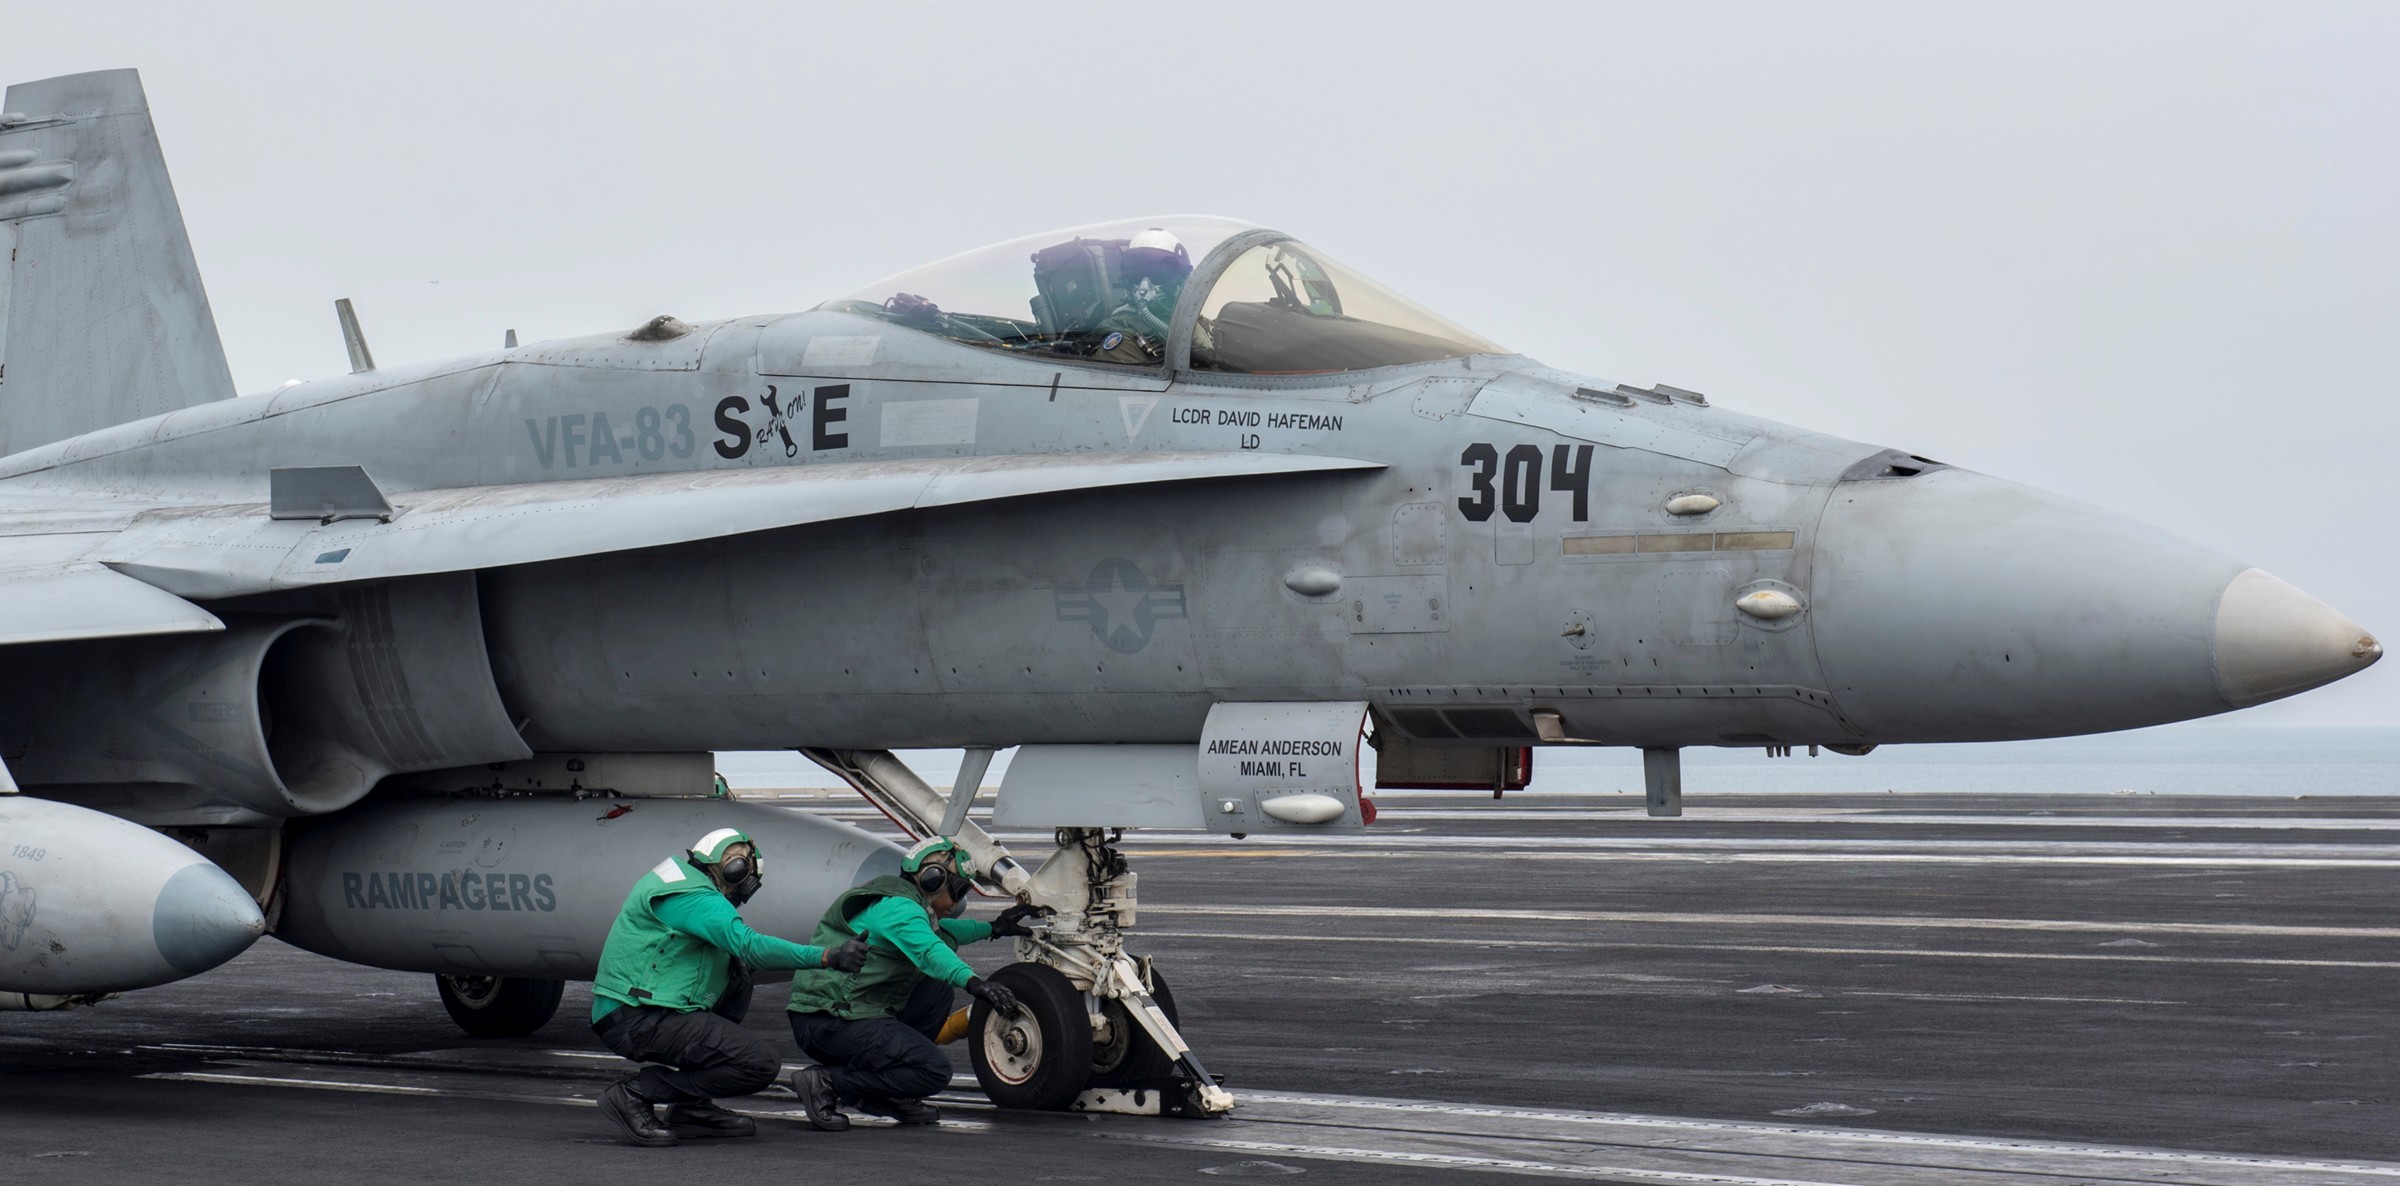 vfa-83 rampagers strike fighter squadron f/a-18c hornet cvw-7 uss harry s. truman cvn-75 58p